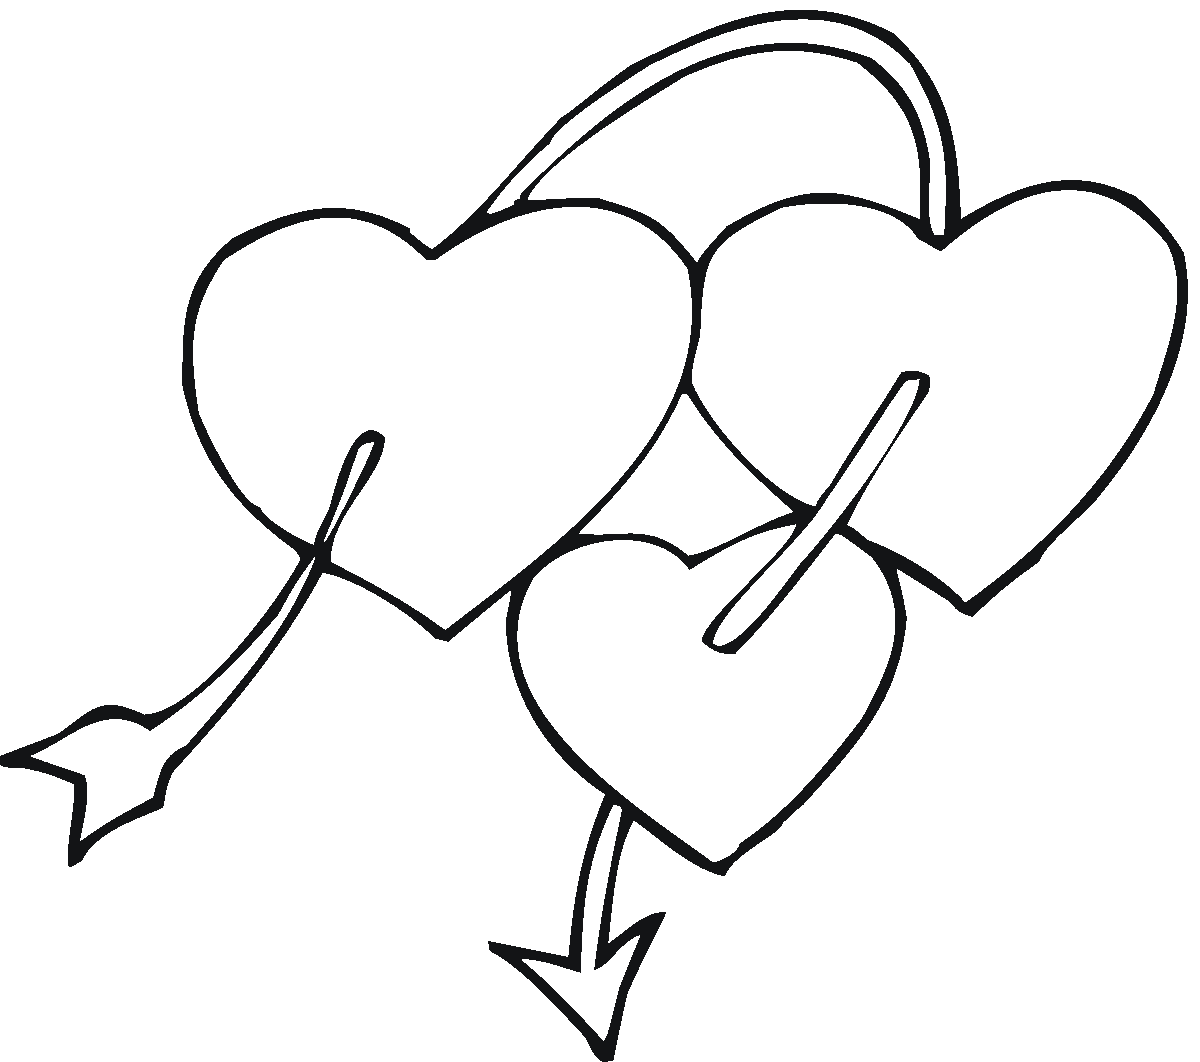 Broken Heart Coloring Pages - Drawing inspiration